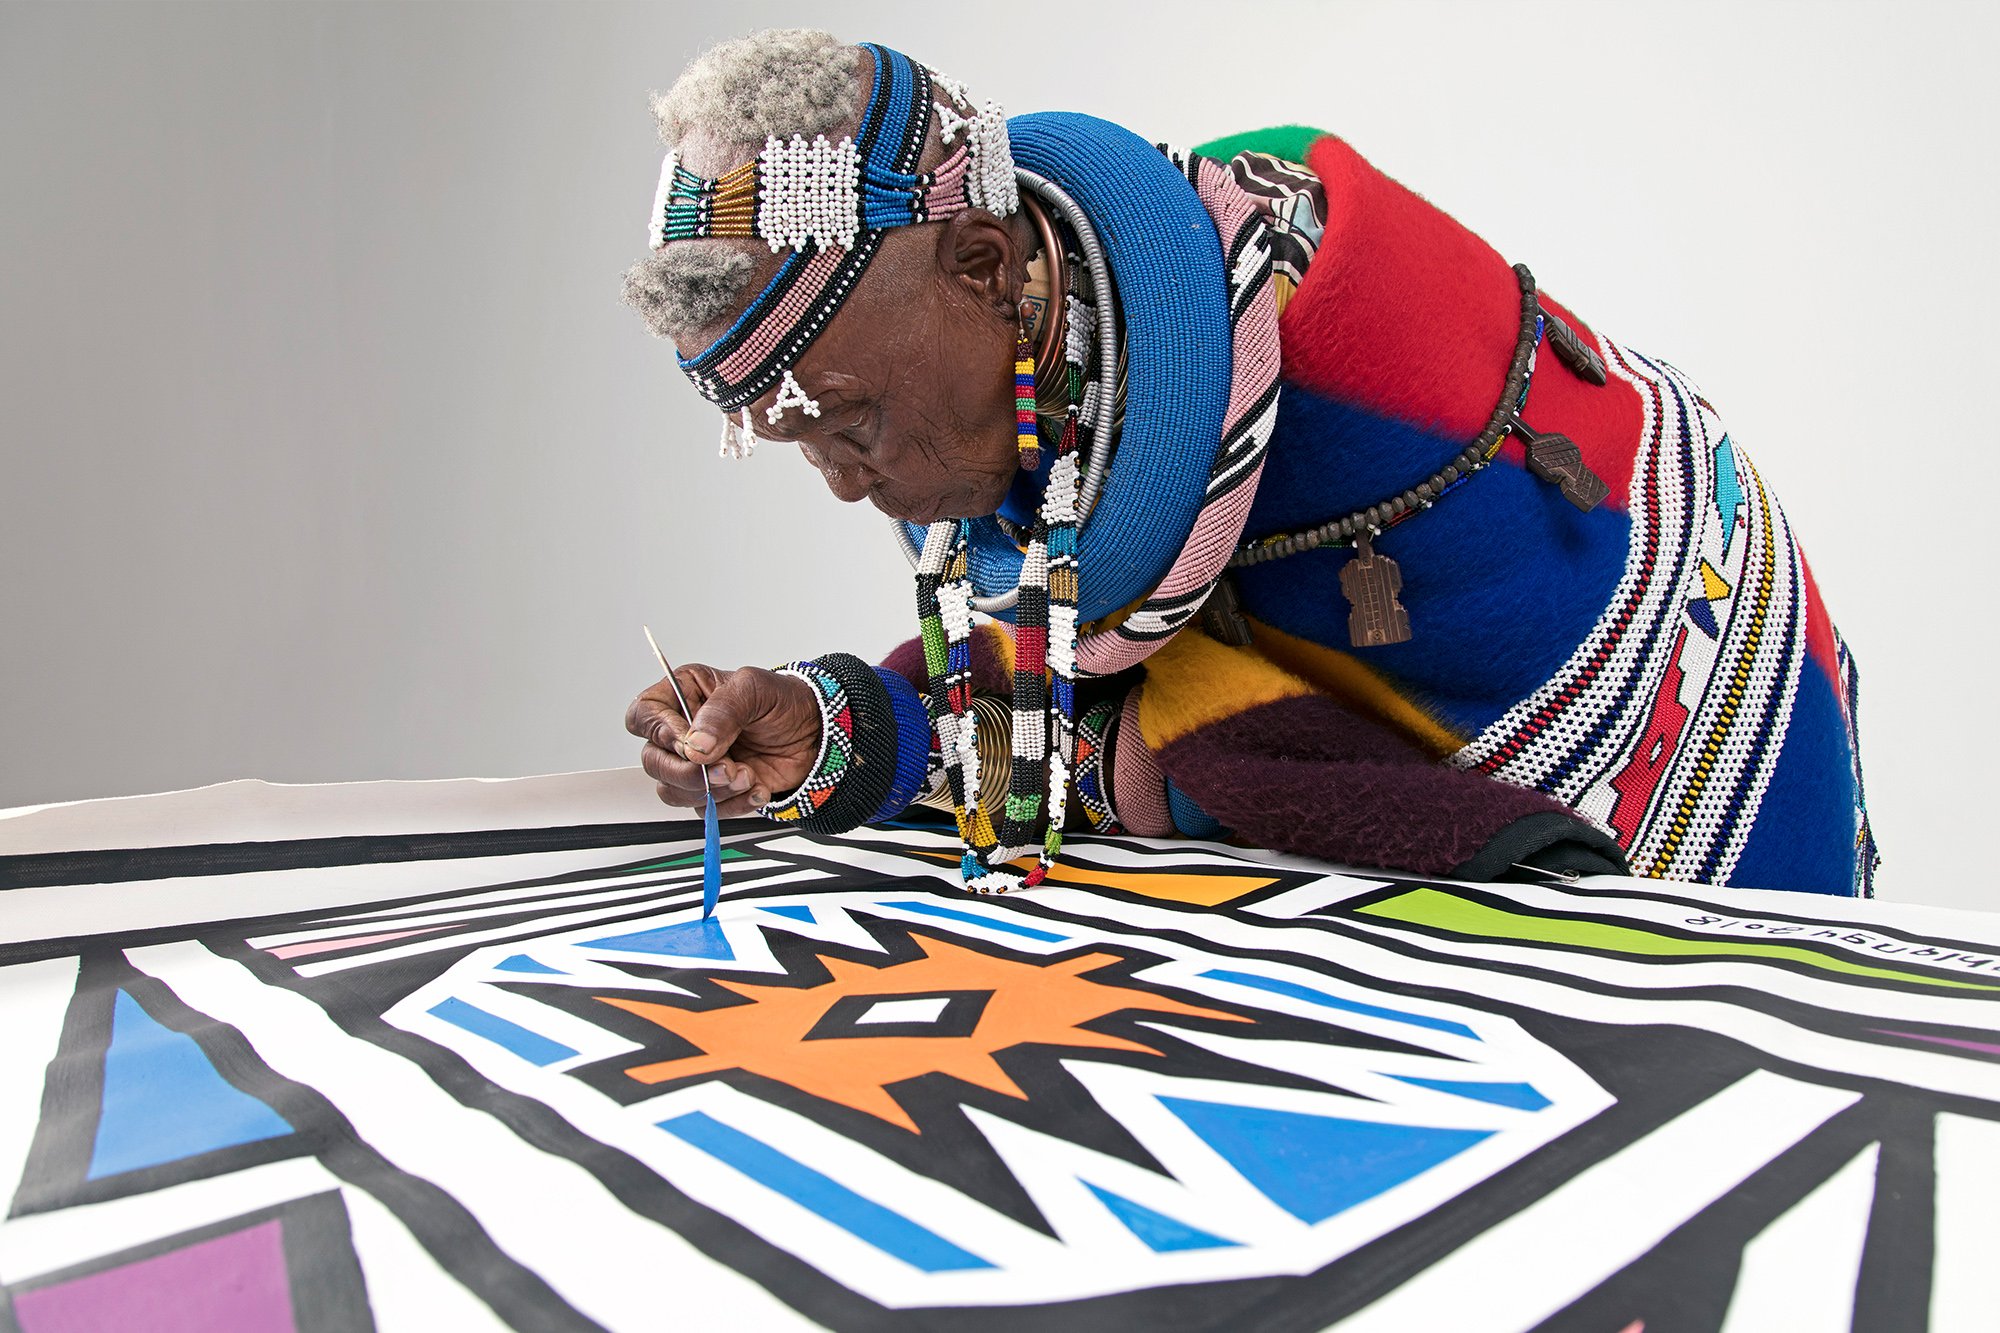 Ellectric — Esther Mahlangus Lifework And Bmw Art Car On Display In